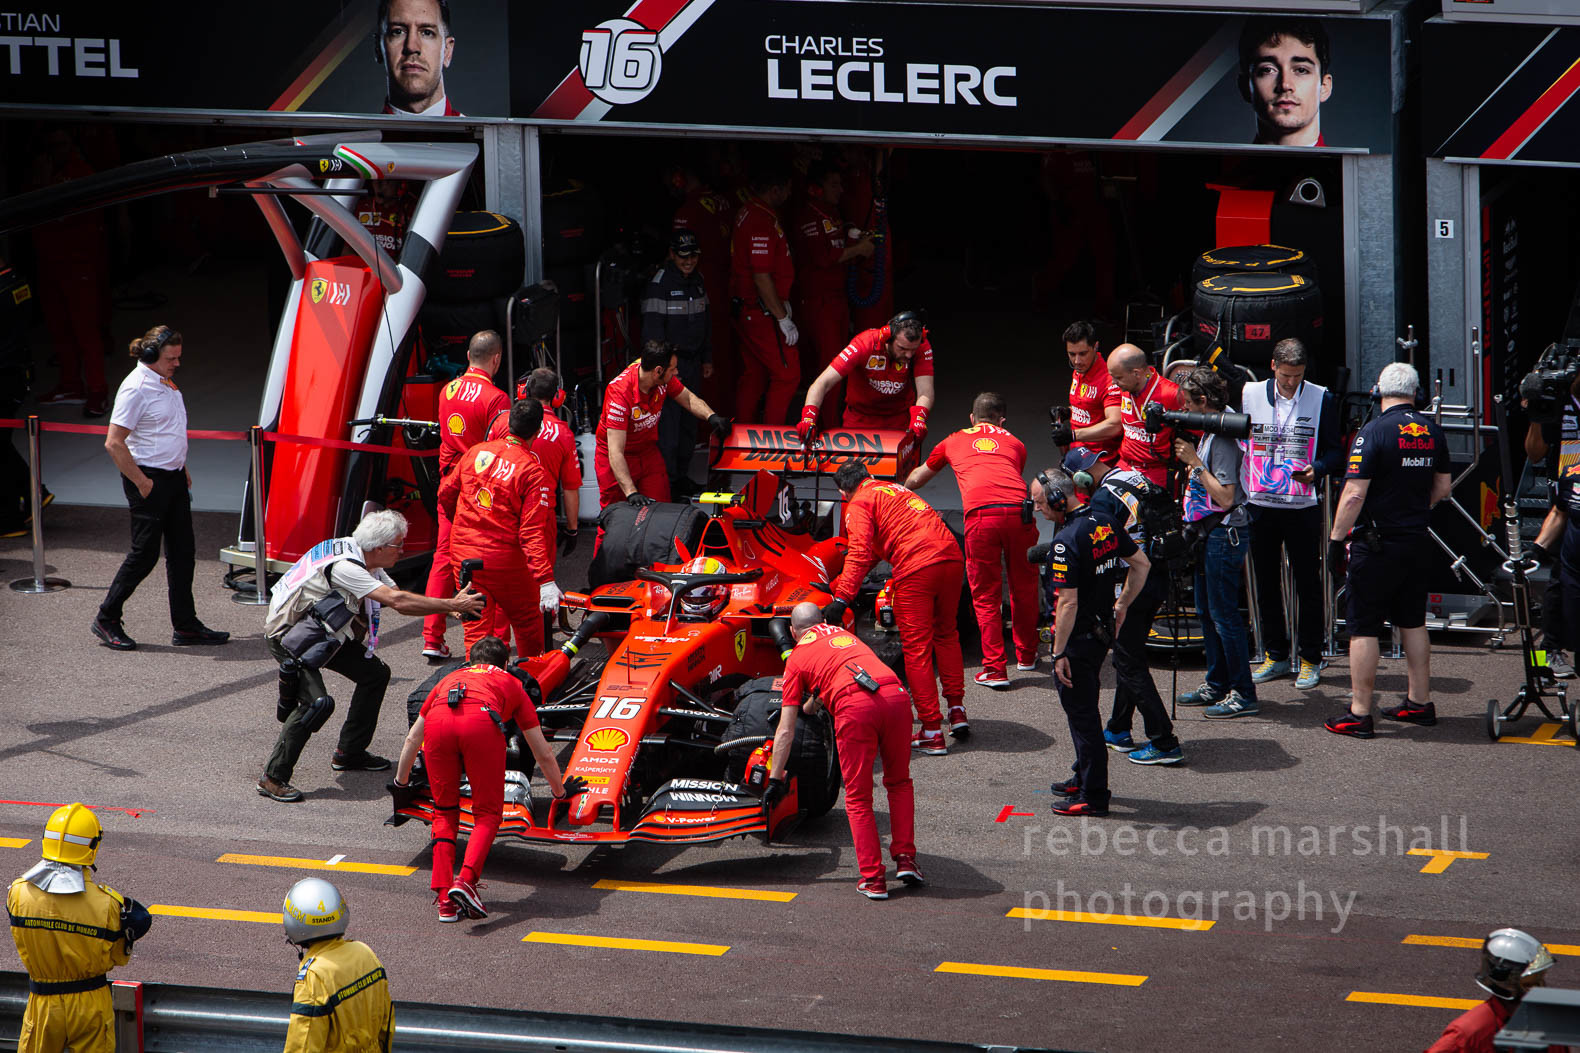 Photograph of race car being reversed into Ferrari garage during the Monaco Grand Prix